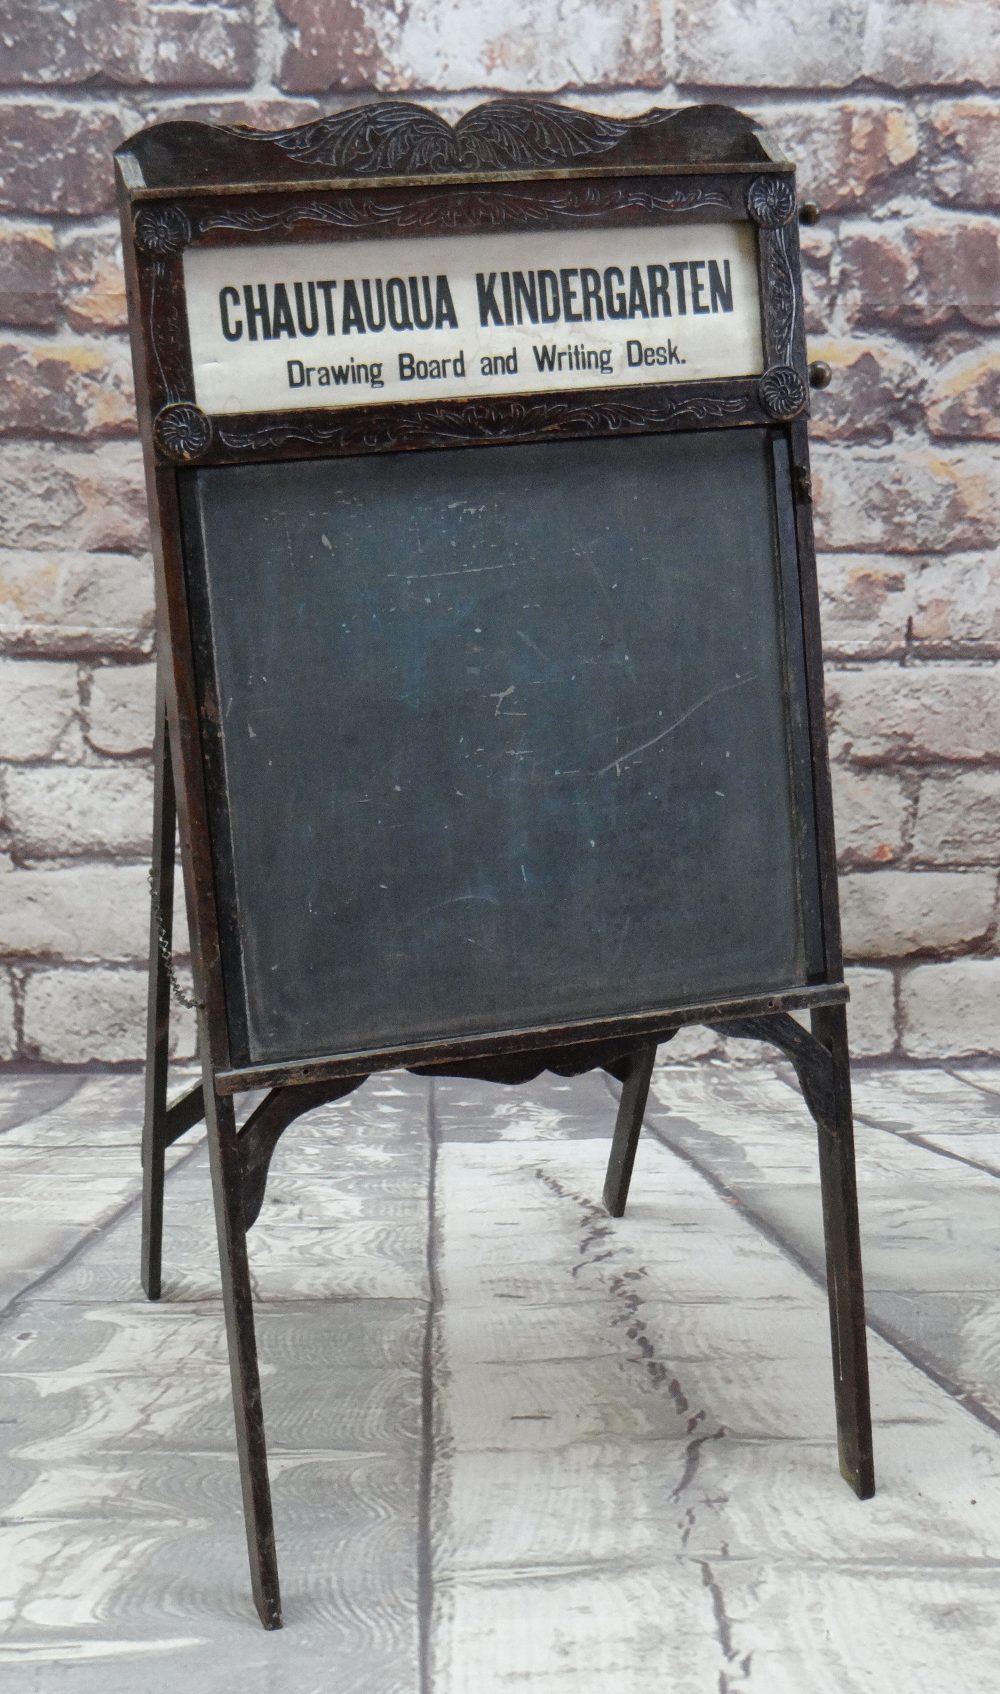 AMERICAN CHAUTAUQUA KINDERGARTEN DRAWING BOARD & WRITING DESK, early 20th century, with revolving - Image 3 of 6